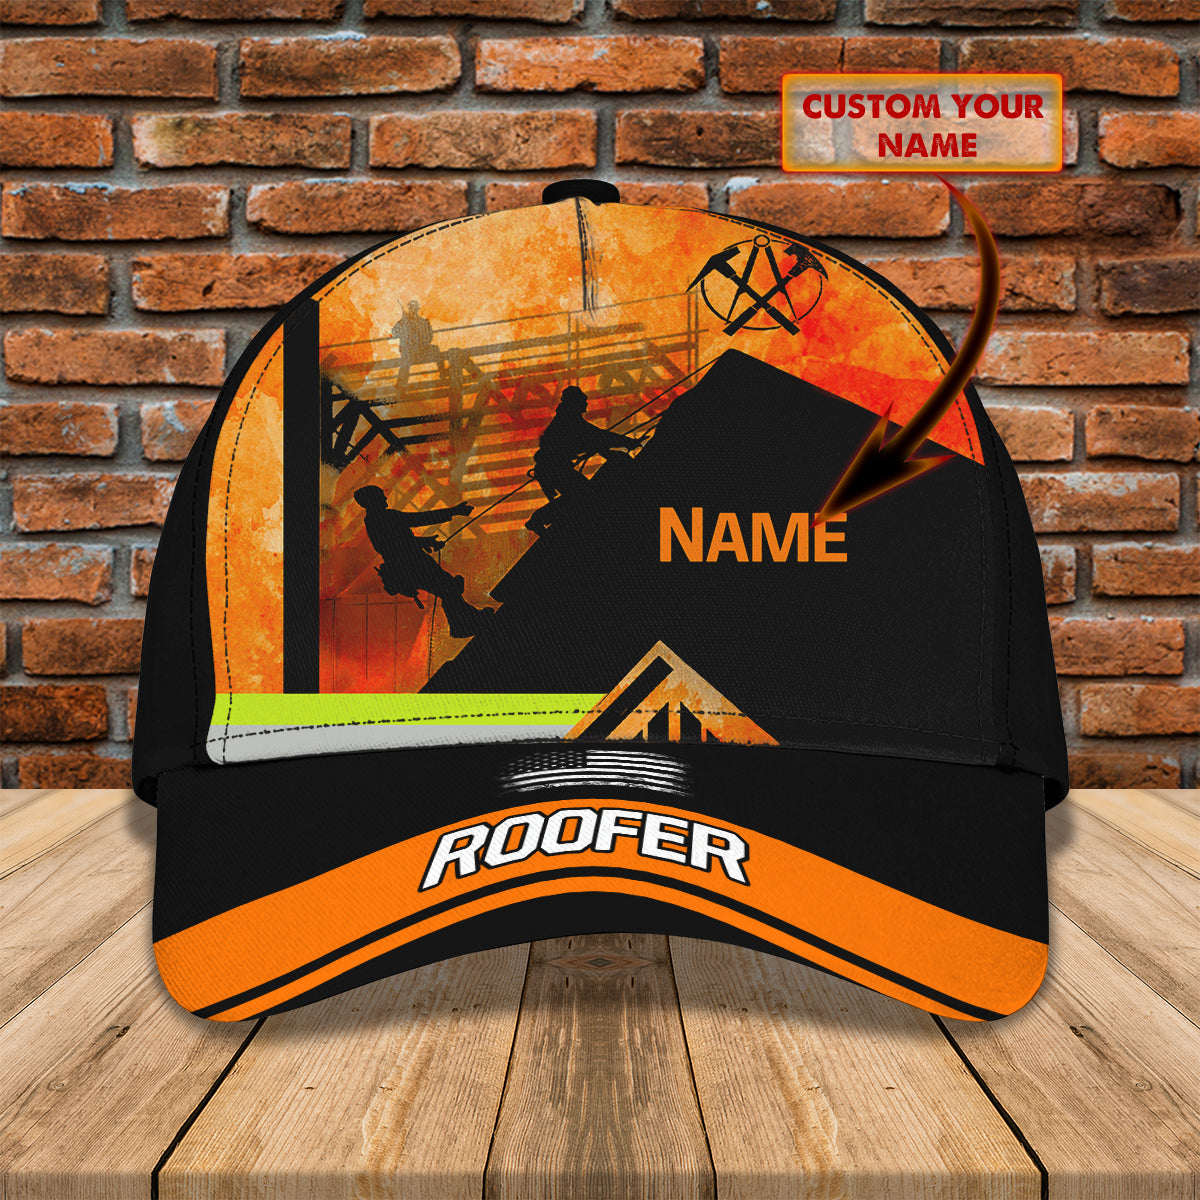 Roofer 2 Hd98- Personalized Name Cap -Loop- Hd98 37